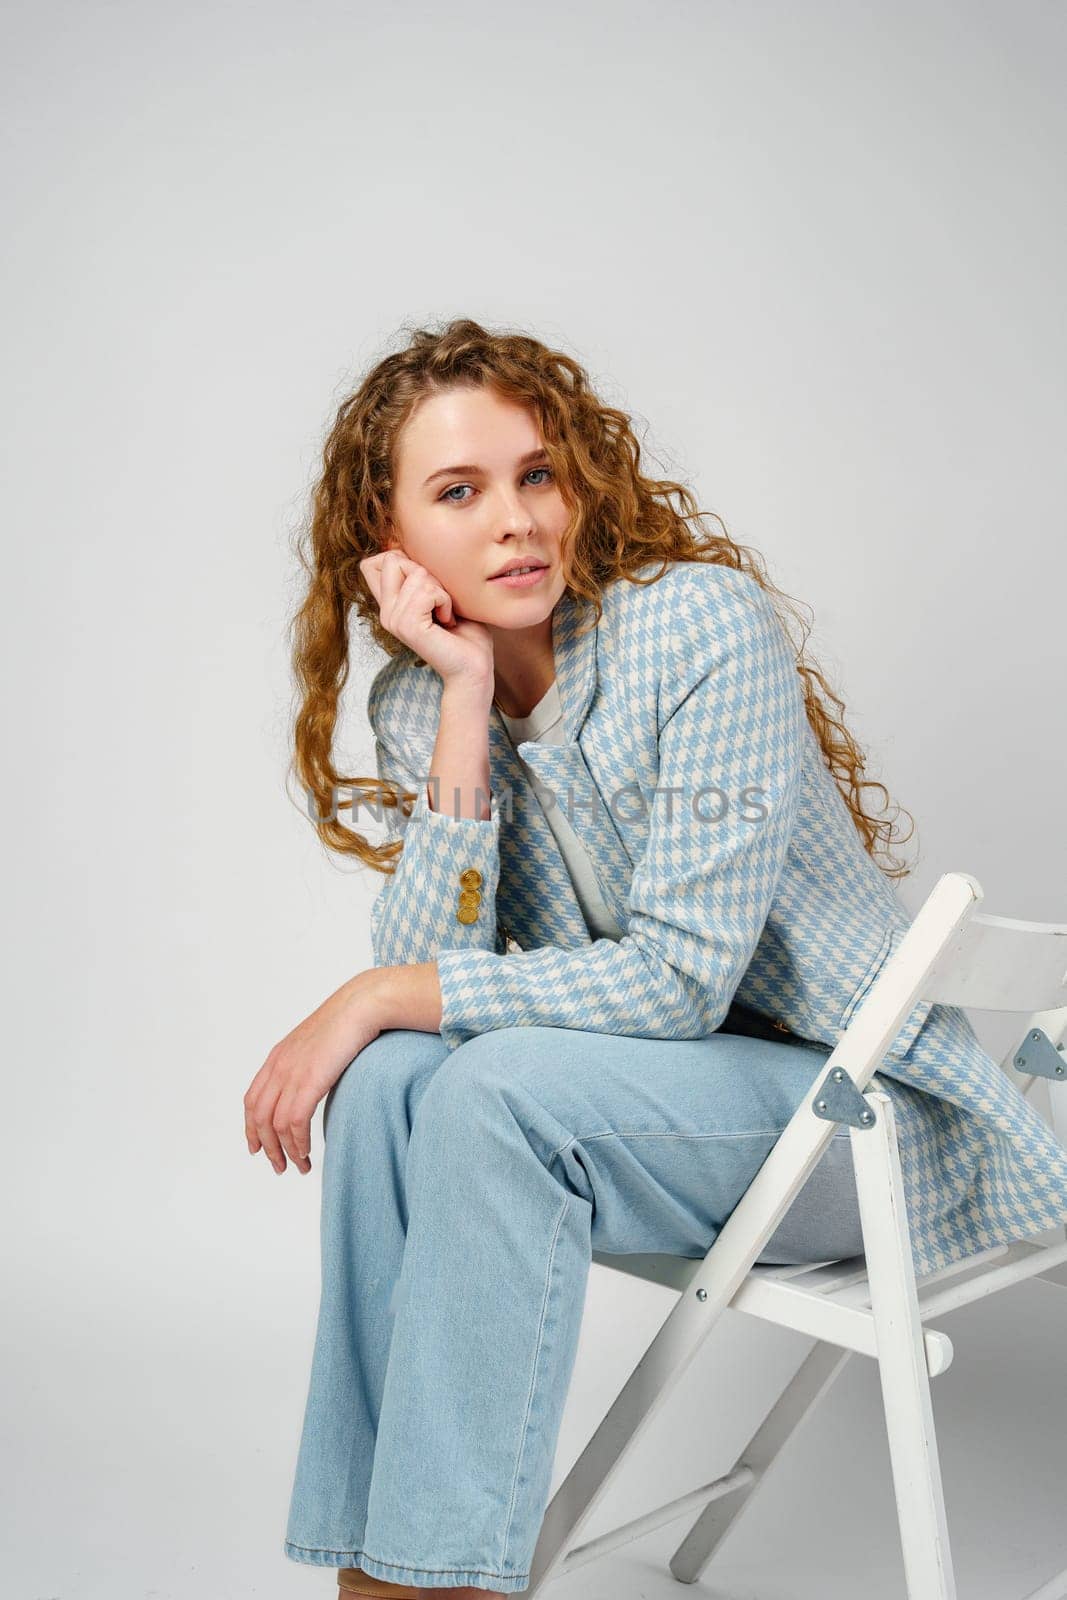 Young woman with curly hair sitting on chair in studio close up